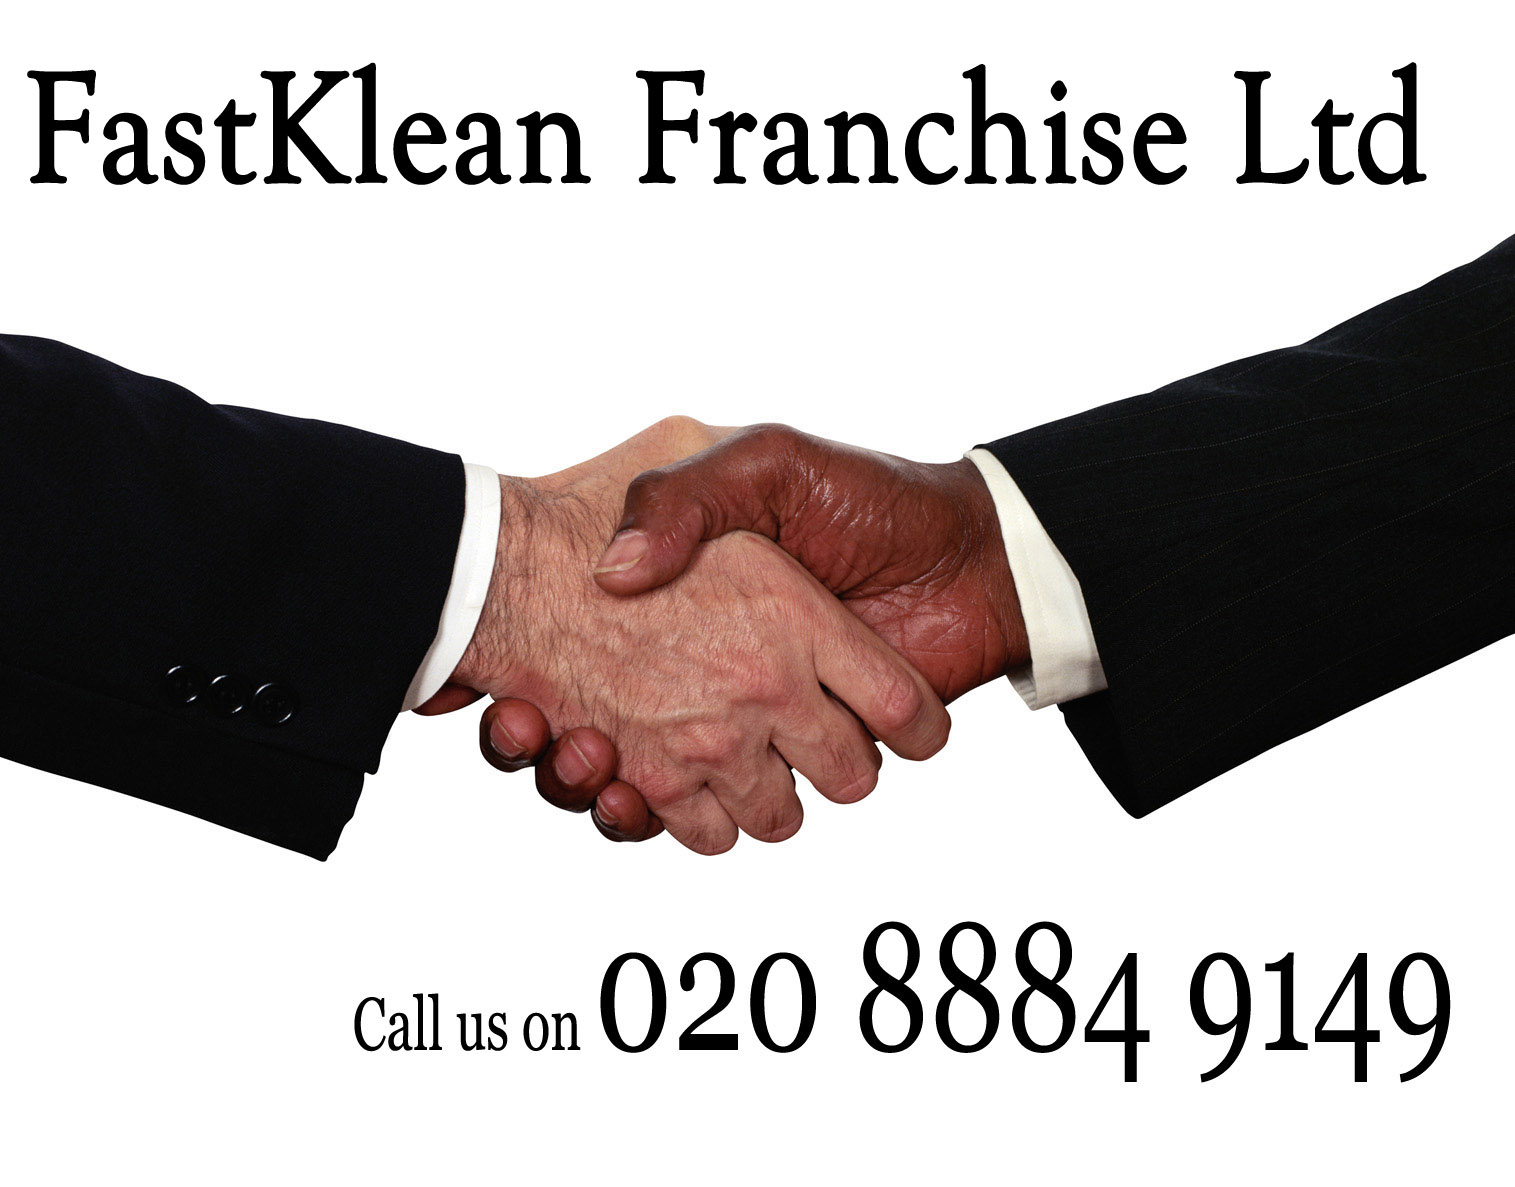 Franchise-Cleaning-Business-Management